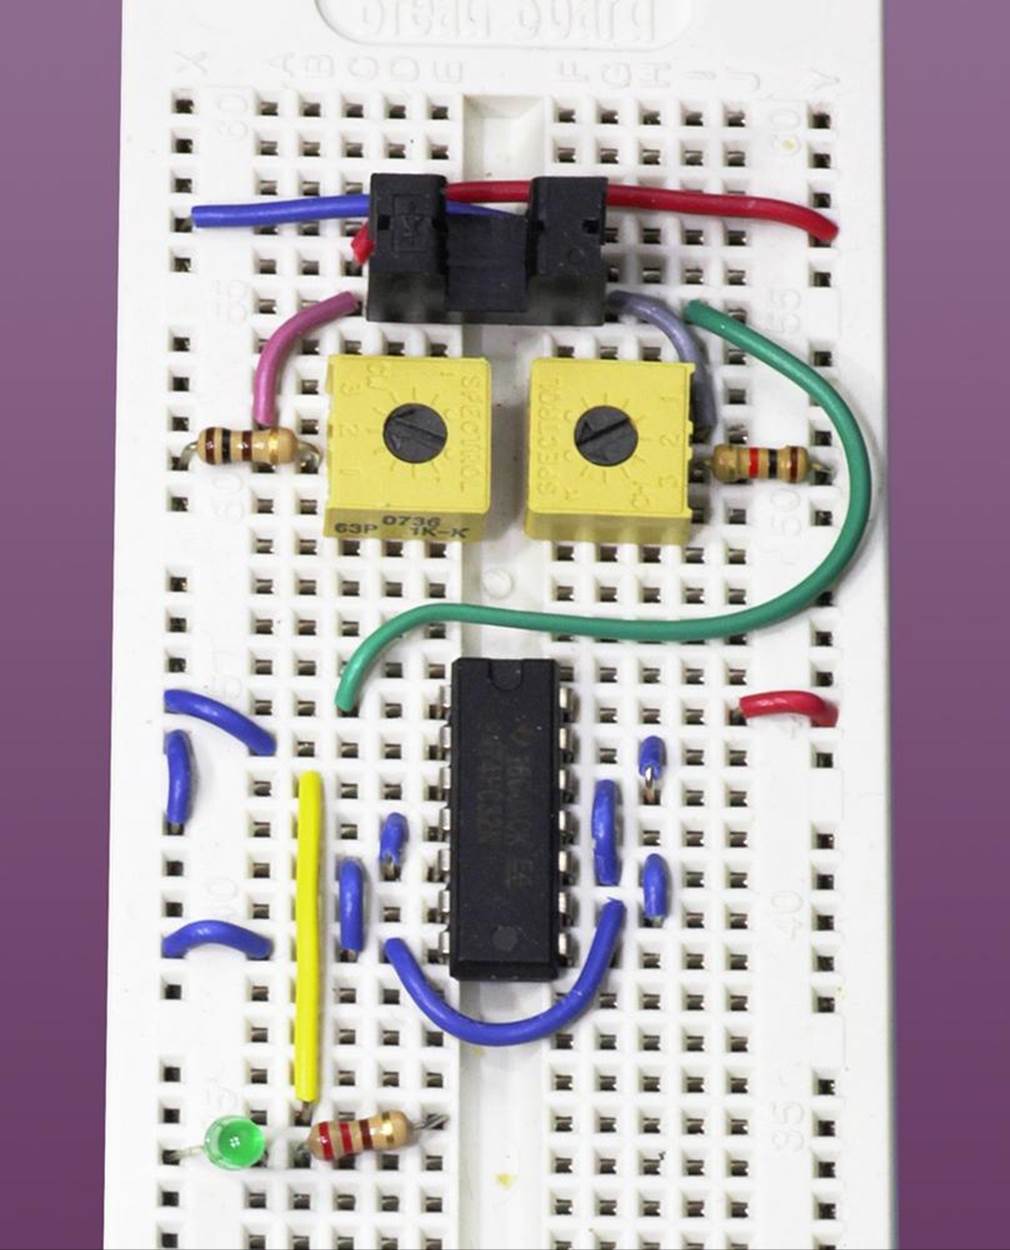 Breadboarded version of the test circuit for a transmissive optical sensor. The U-shaped sensor is at the top, just above the trimmer potentiometers.